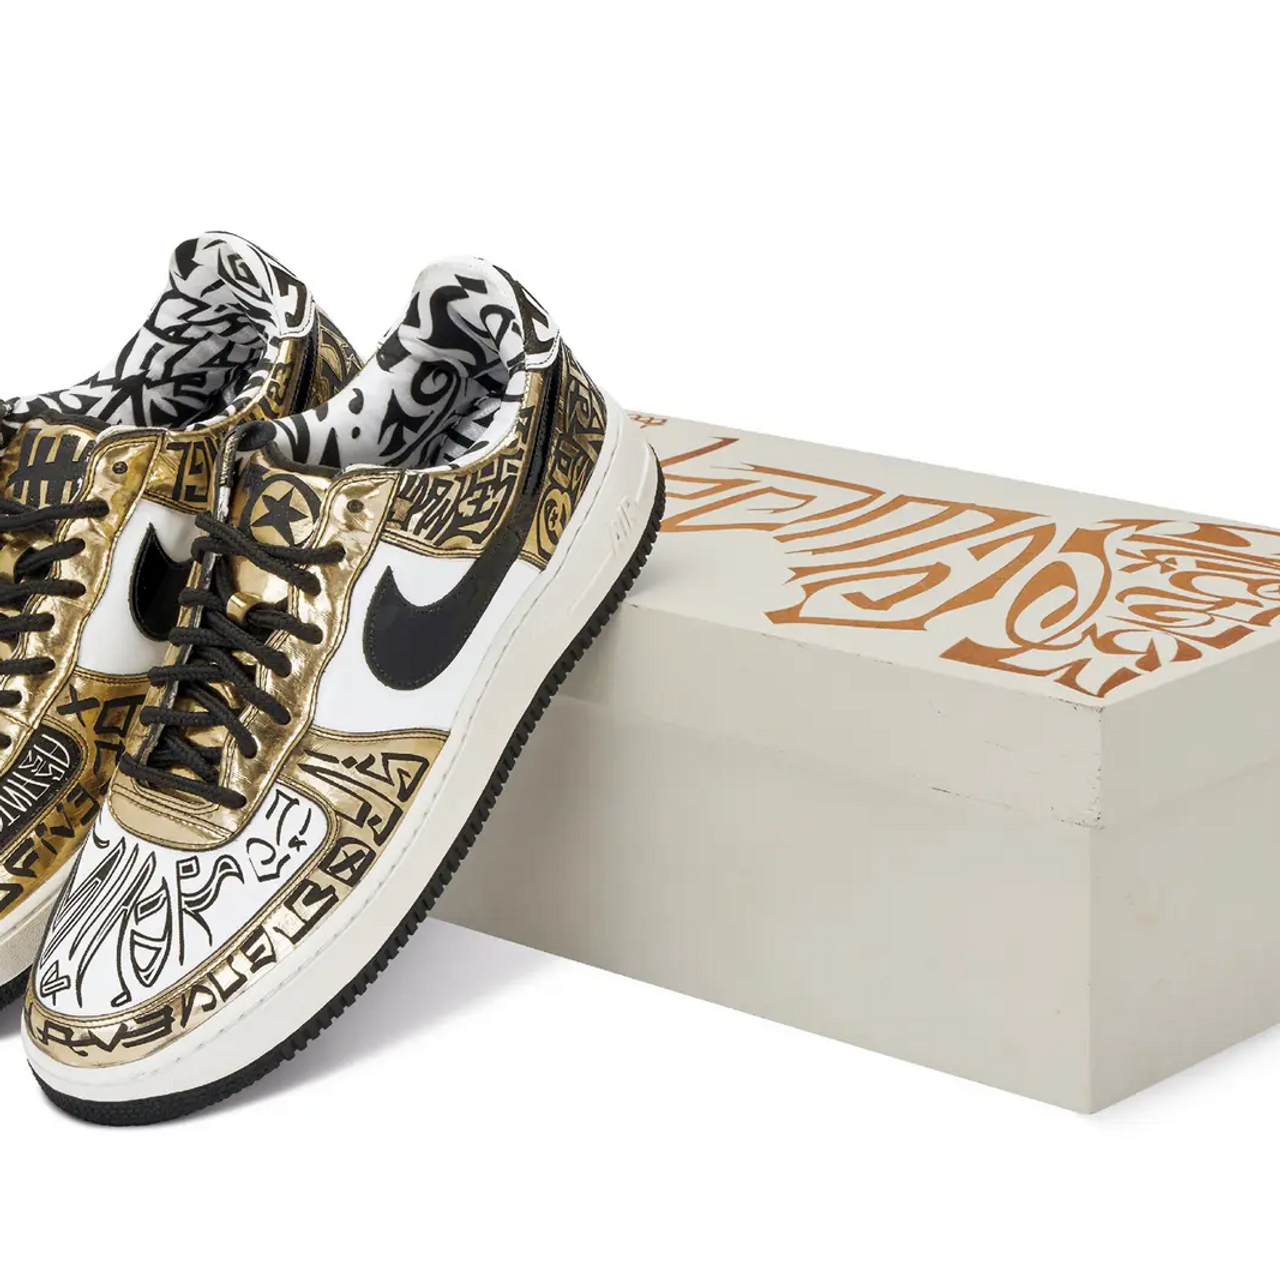 Fukijama Gold' Nike 1s Sell at Sotheby's 'Entourage' Auction - Sneaker Freaker